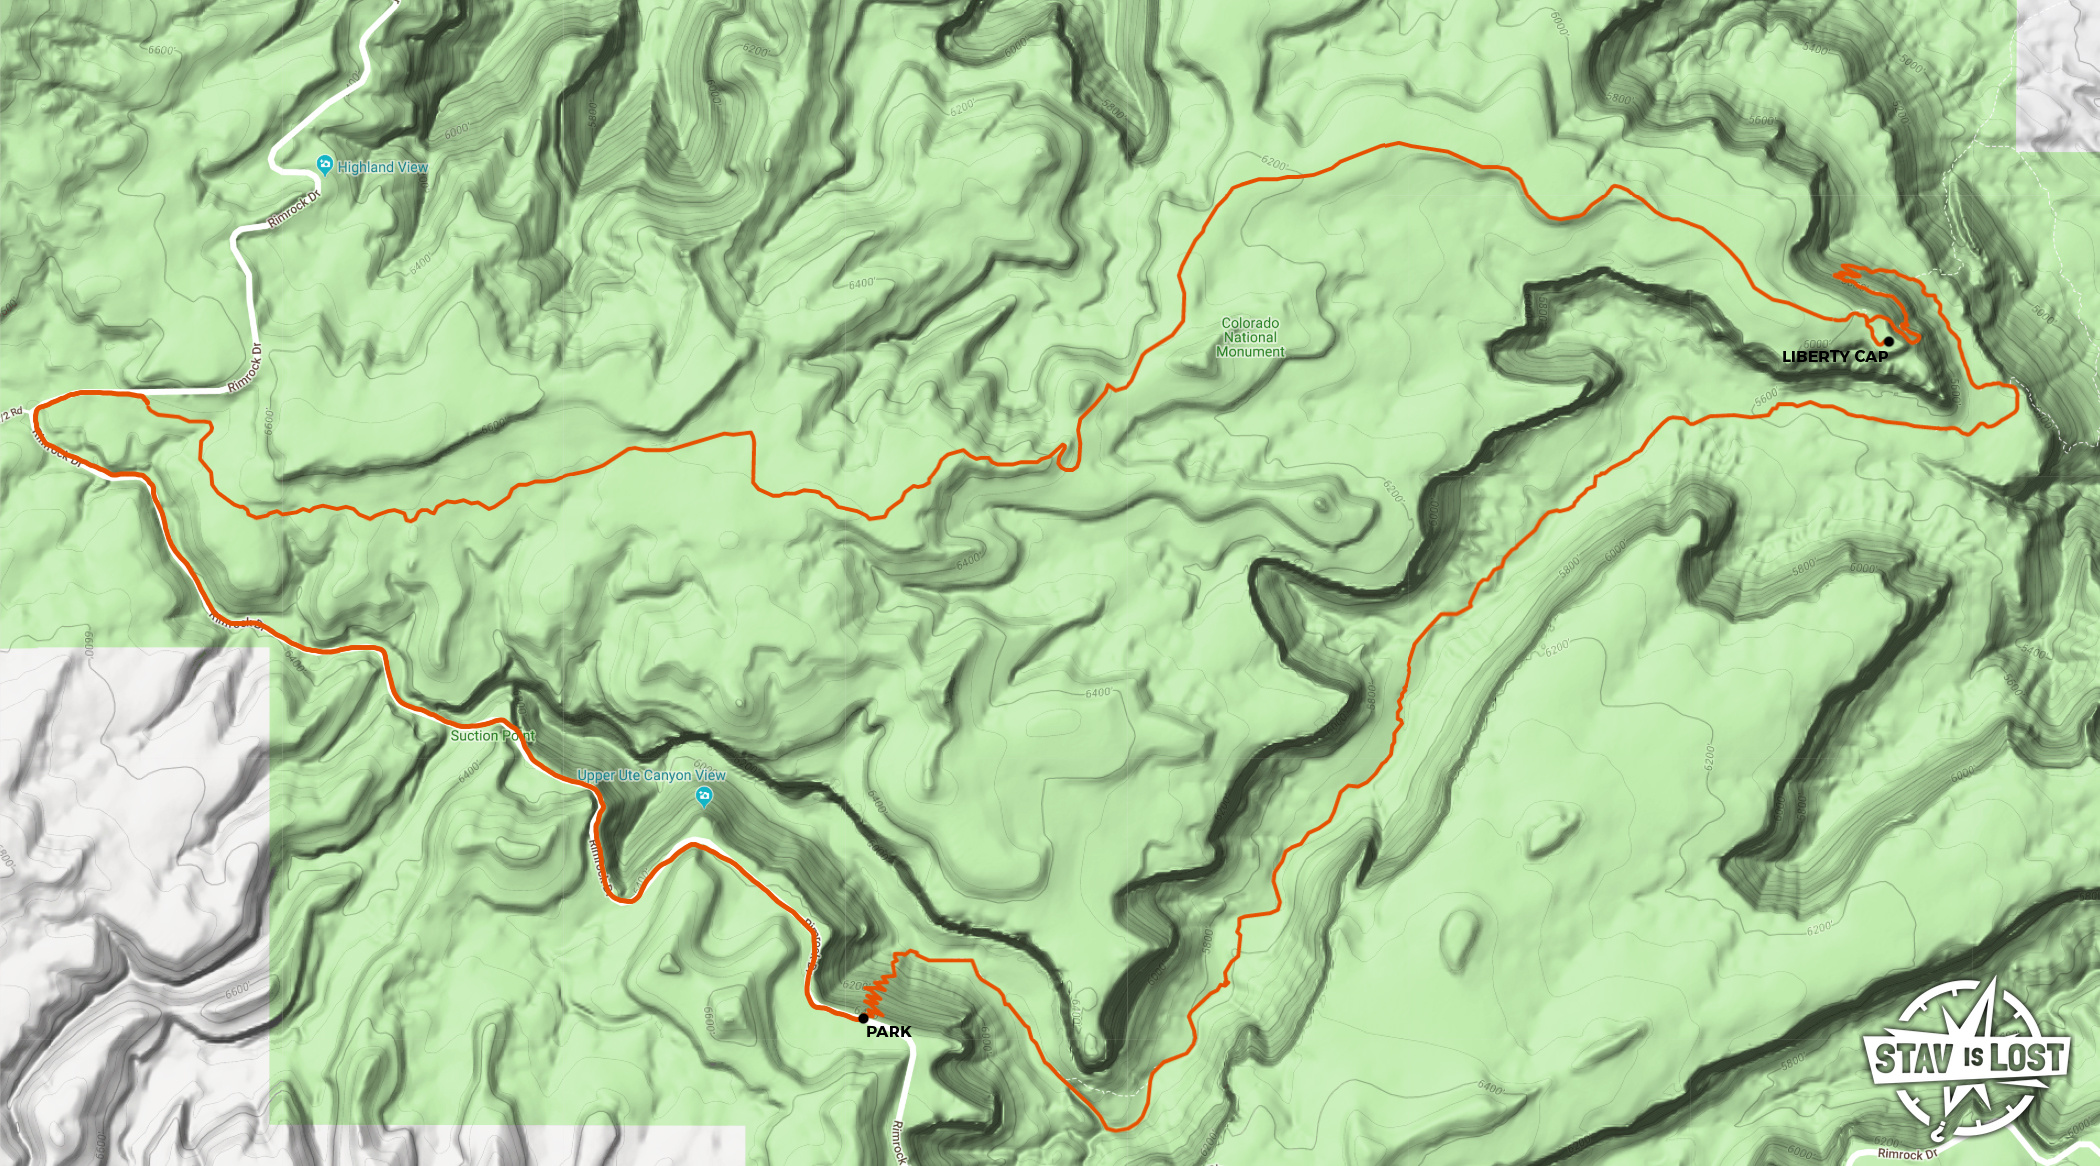 map for Ute Canyon and Upper Liberty Cap Loop by stav is lost